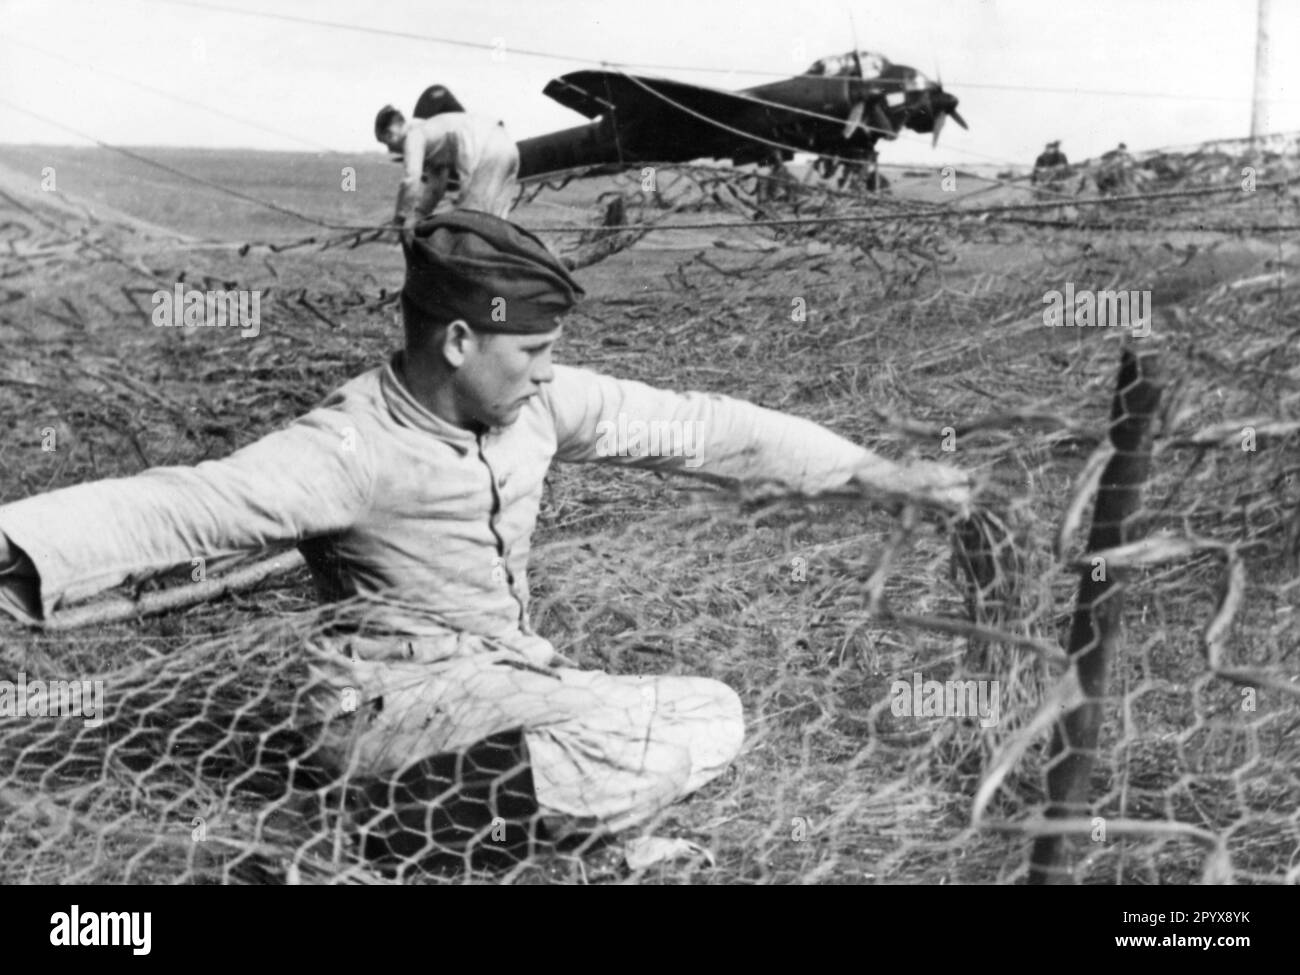 Members of a construction company build camouflaged boxes for Junkers Ju 88 Luftwaffe fighter planes. The wire mesh is covered with camouflage material to conceal the planes from reconnaissance during the day on the field airfield. The aircraft in the background wears a dark coat of paint for night operations against the British Isles. Photo Göricke. [automated translation] Stock Photo